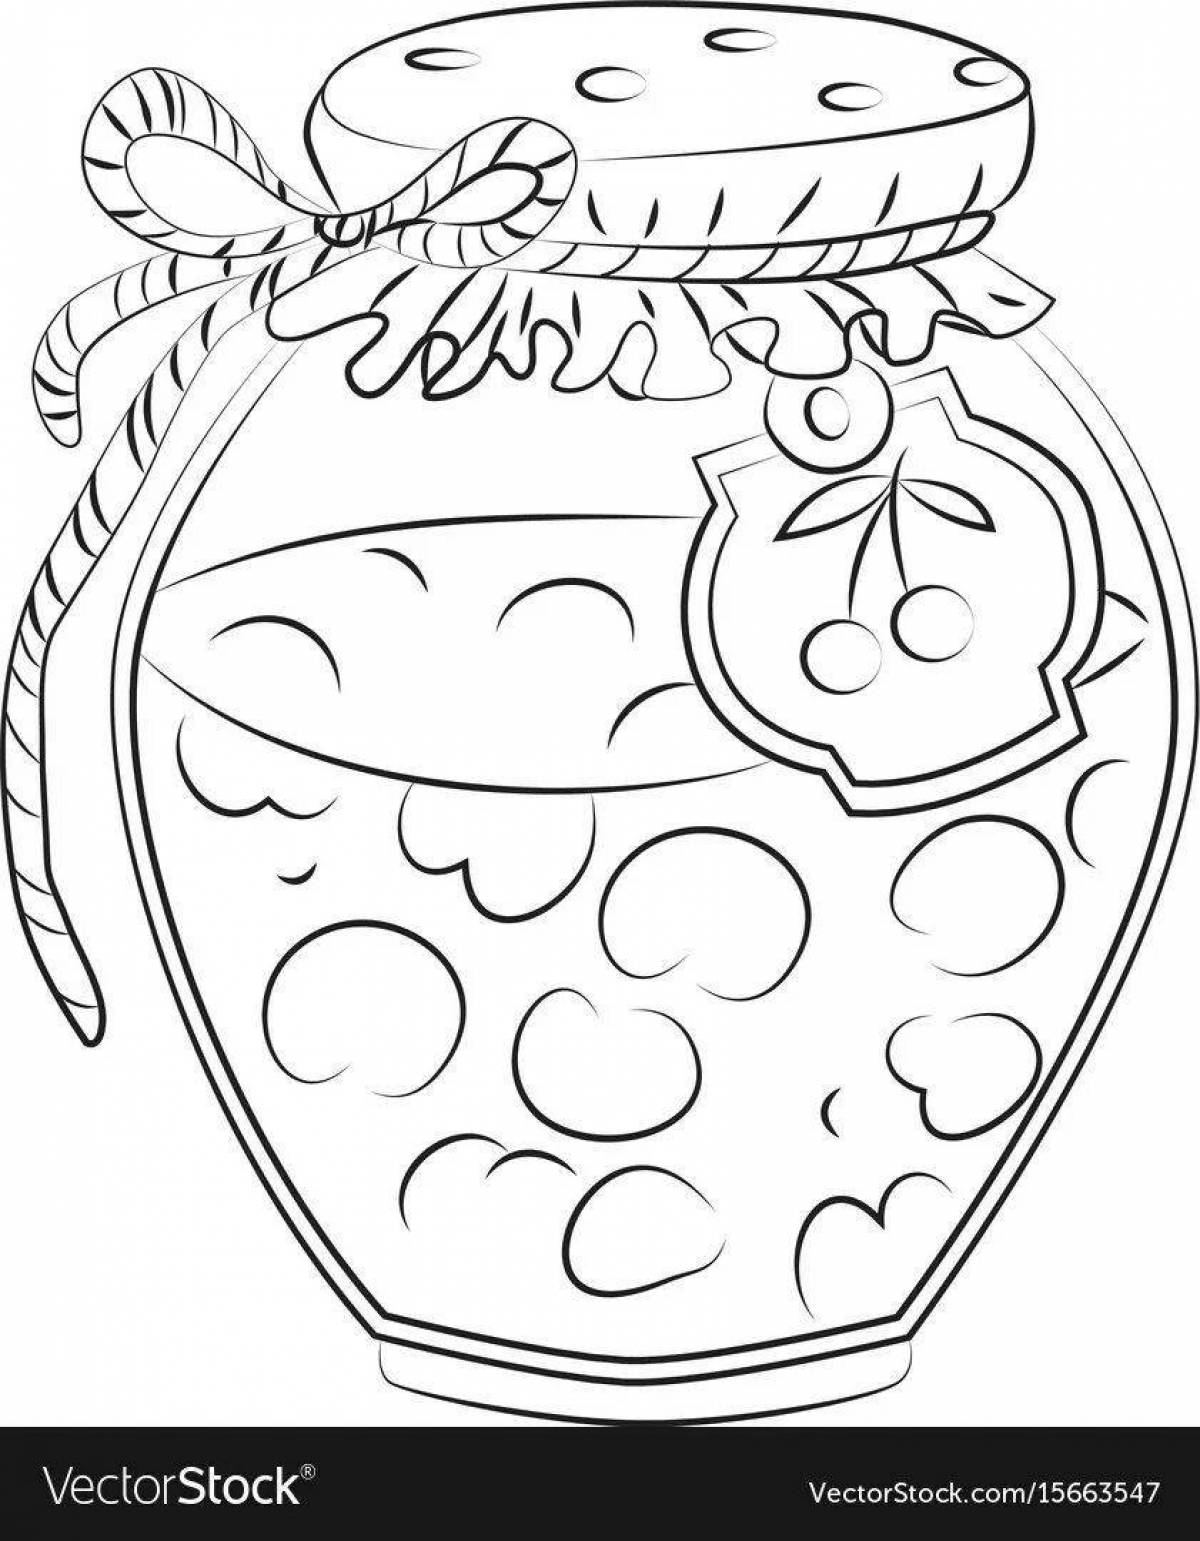 Brilliant compote coloring page for students